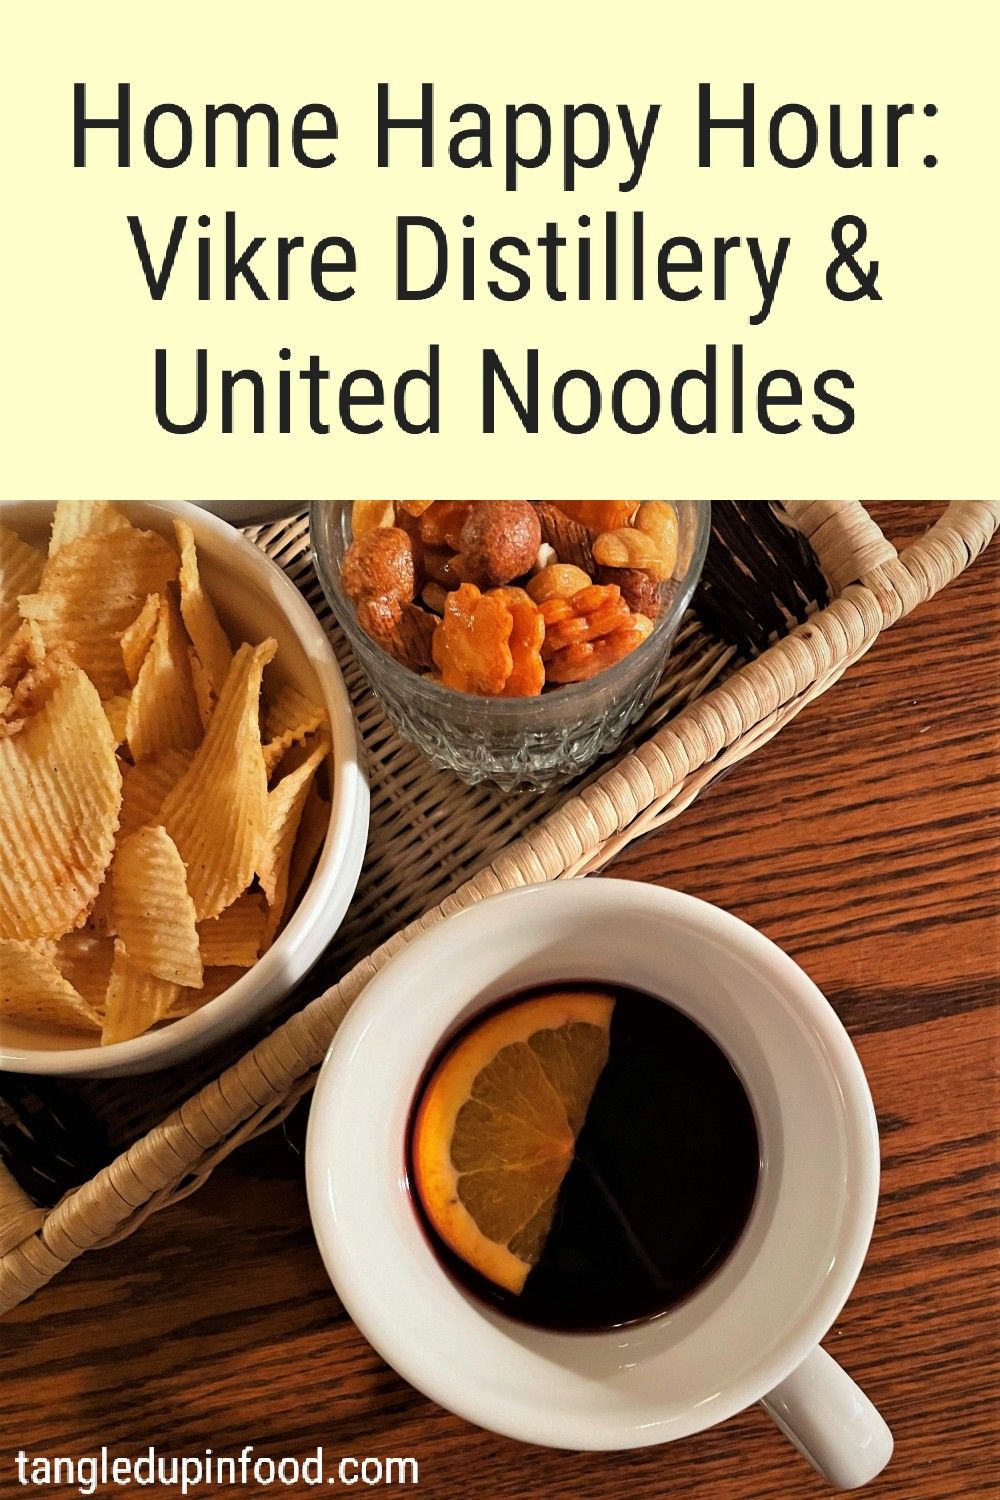 Mug of glogg cocktail and bowls of chips with text reading "Home Happy Hour: Vikre Distillery & United Noodles"